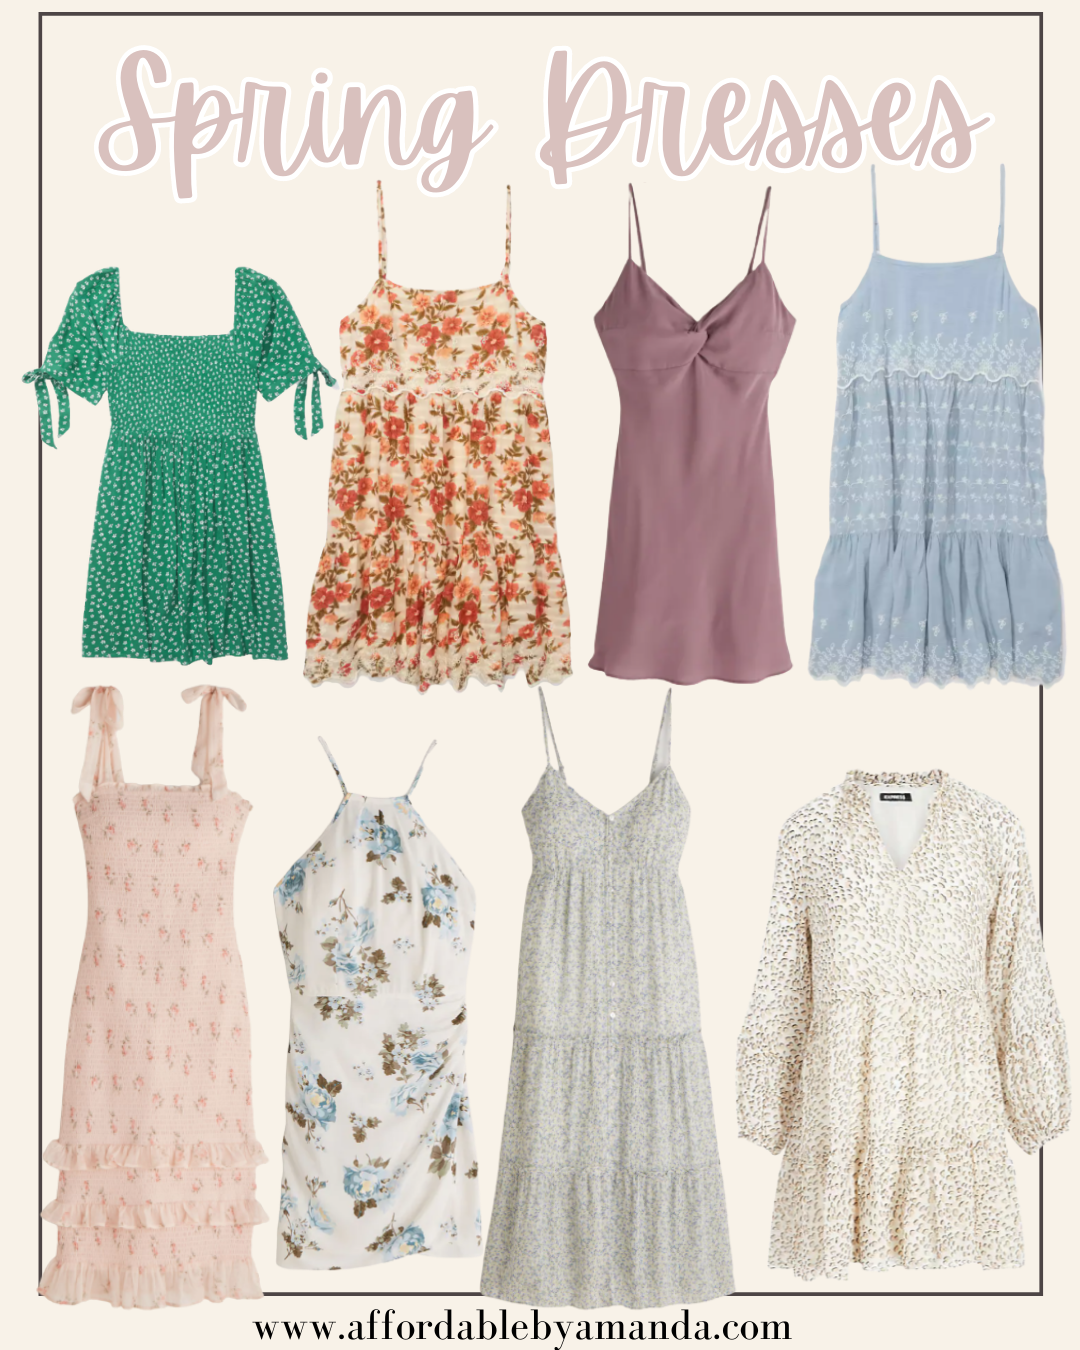 The Best Dresses For Spring 2021 | Affordable by Amanda